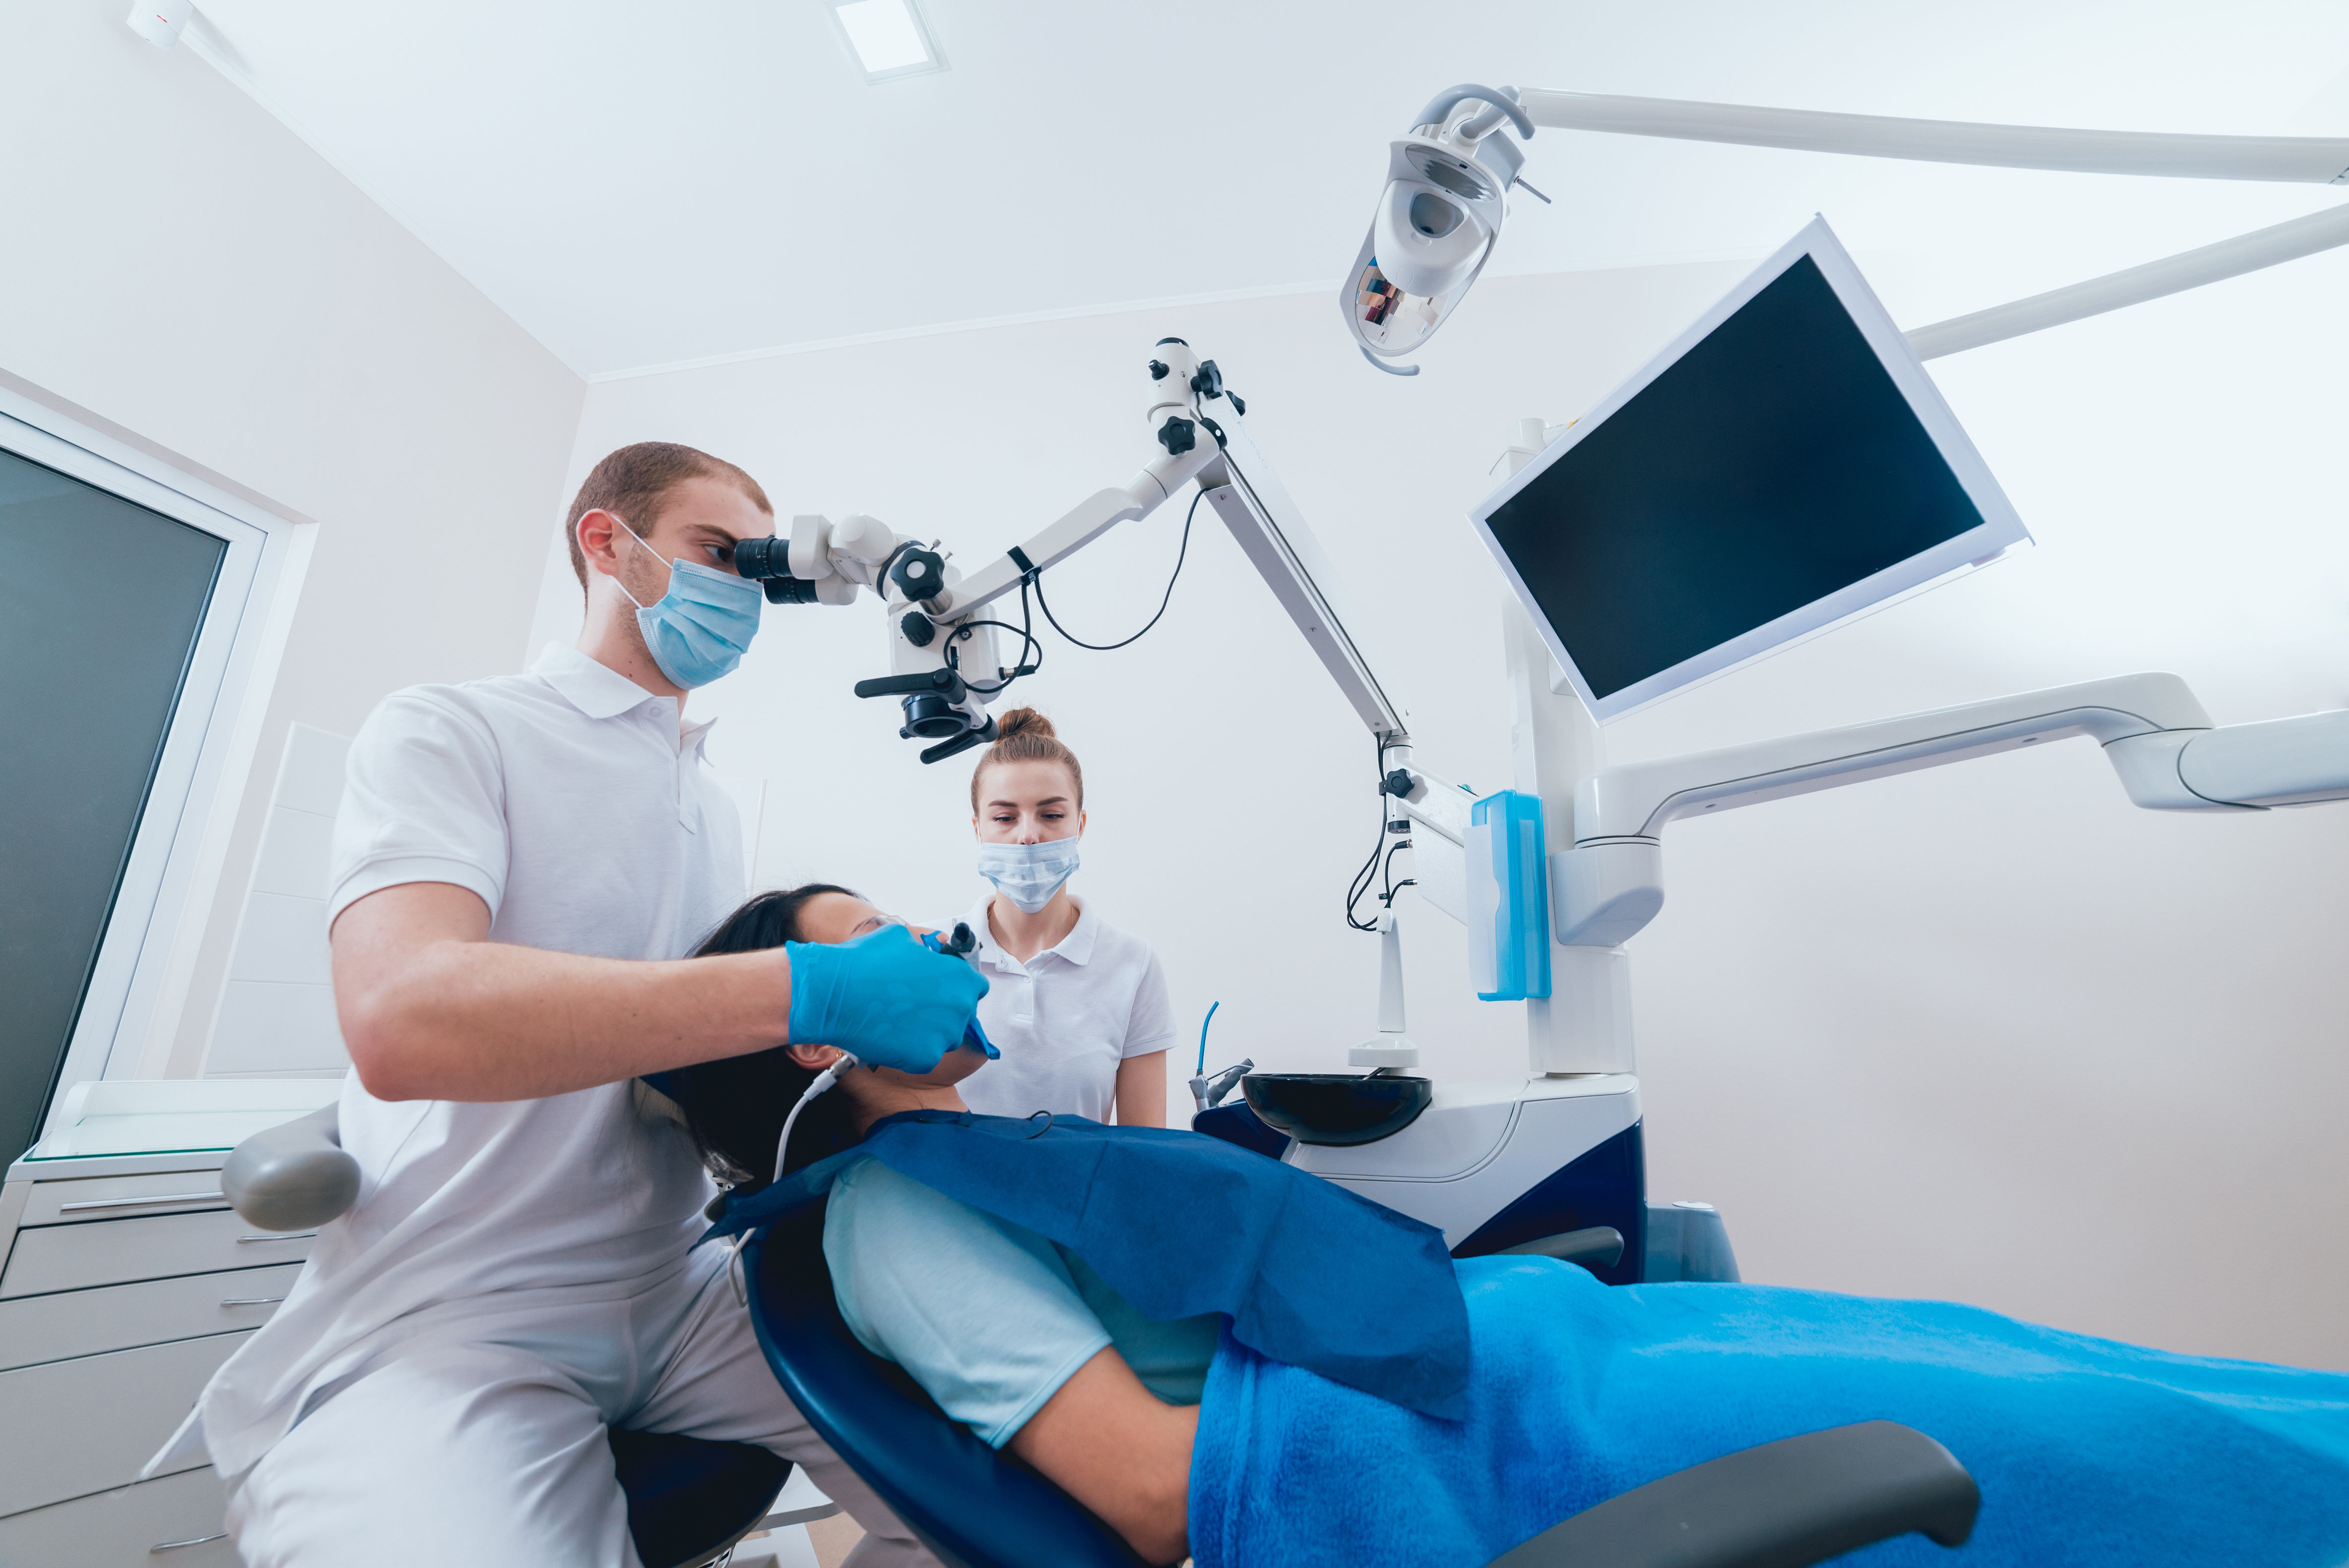 Root Canal Treatment Penrith